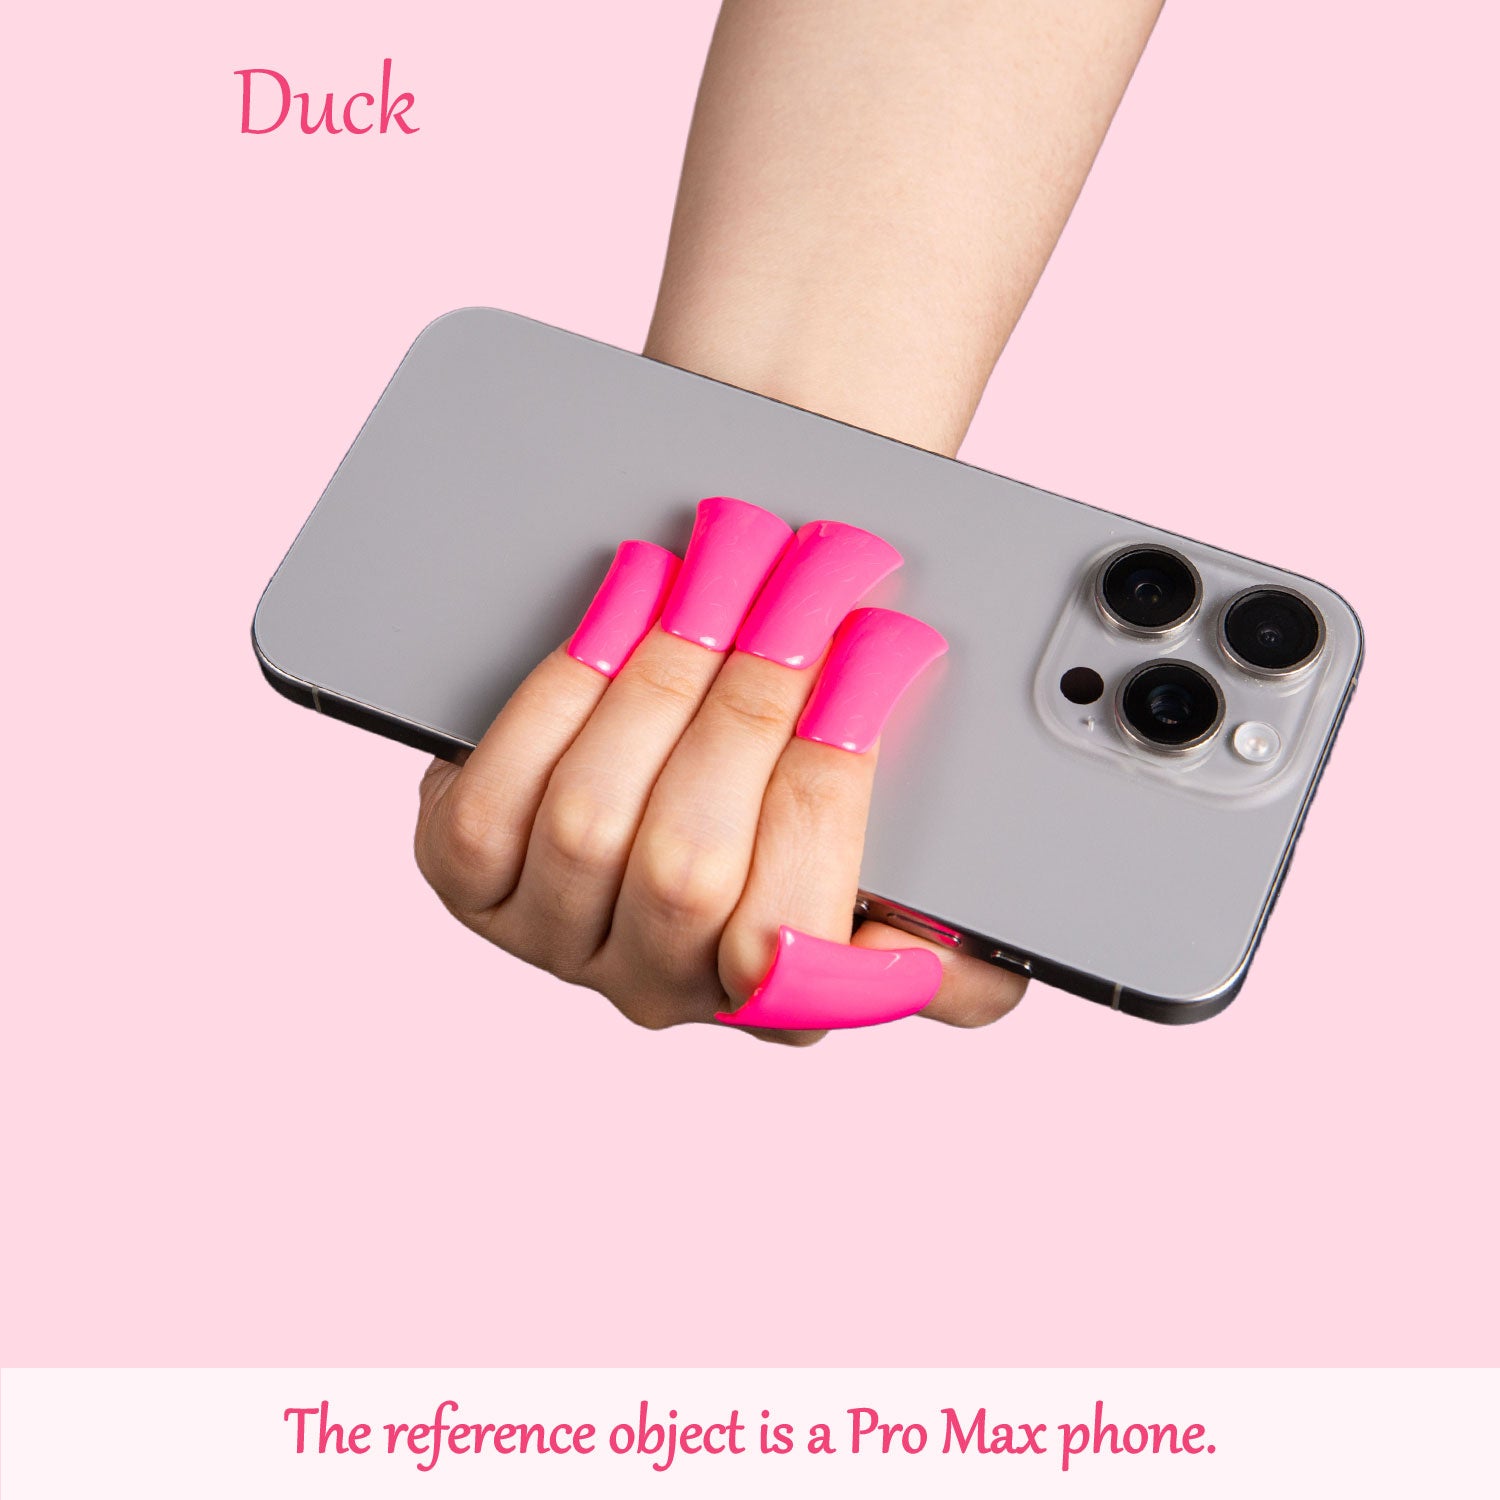 Person's hand with vibrant pink press-on acrylic nails holding a Pro Max phone against a light pink background with text 'Duck' and 'The reference object is a Pro Max phone.'